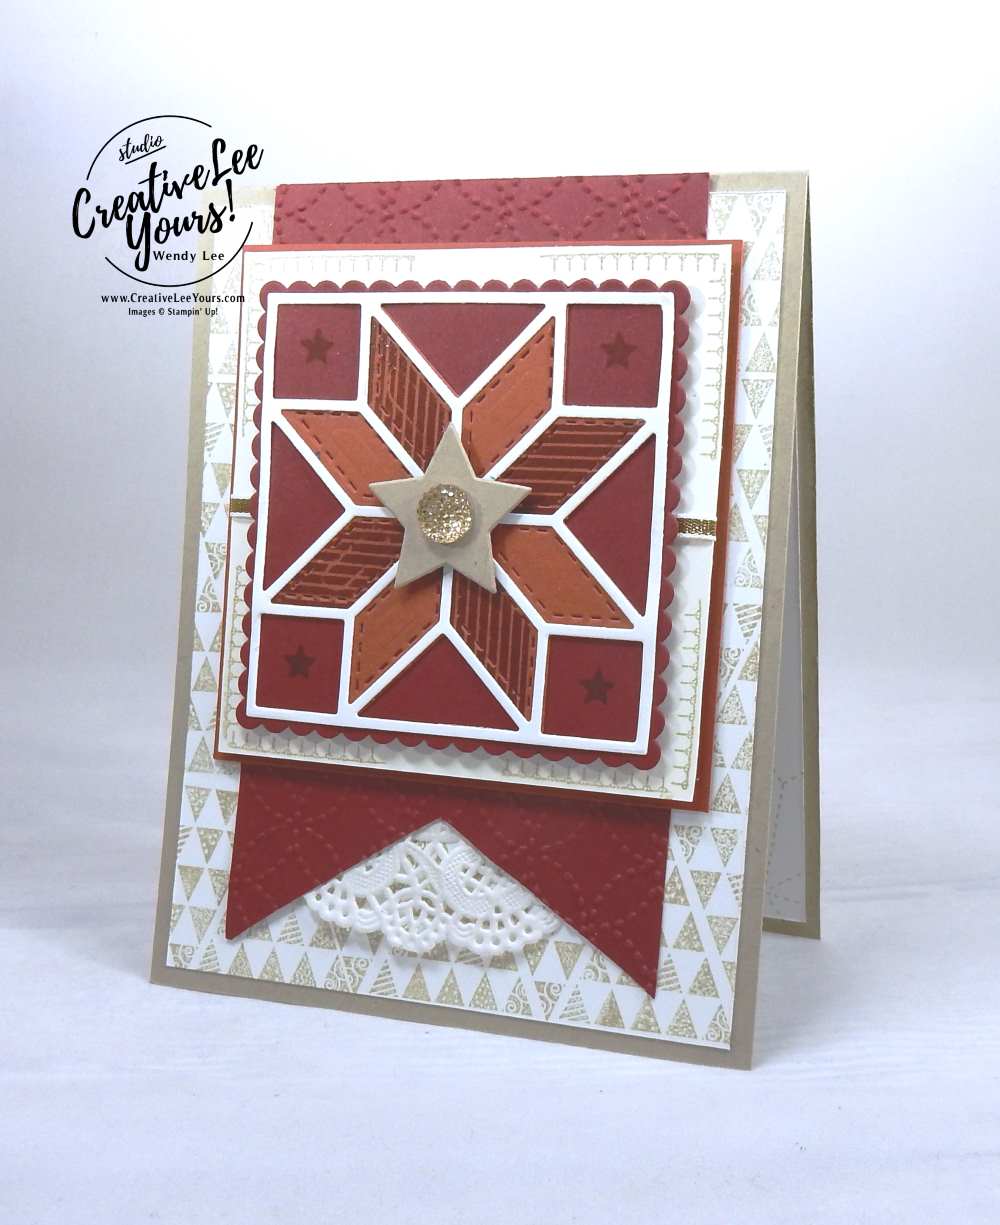 Fall Quilt by Wendy Lee,stampin up, stamping, hand made cards, rubber stamps, #creativeleeyours, creatively yours, September 2017 FMN class, christmas quilt stamp set, birthday, friend